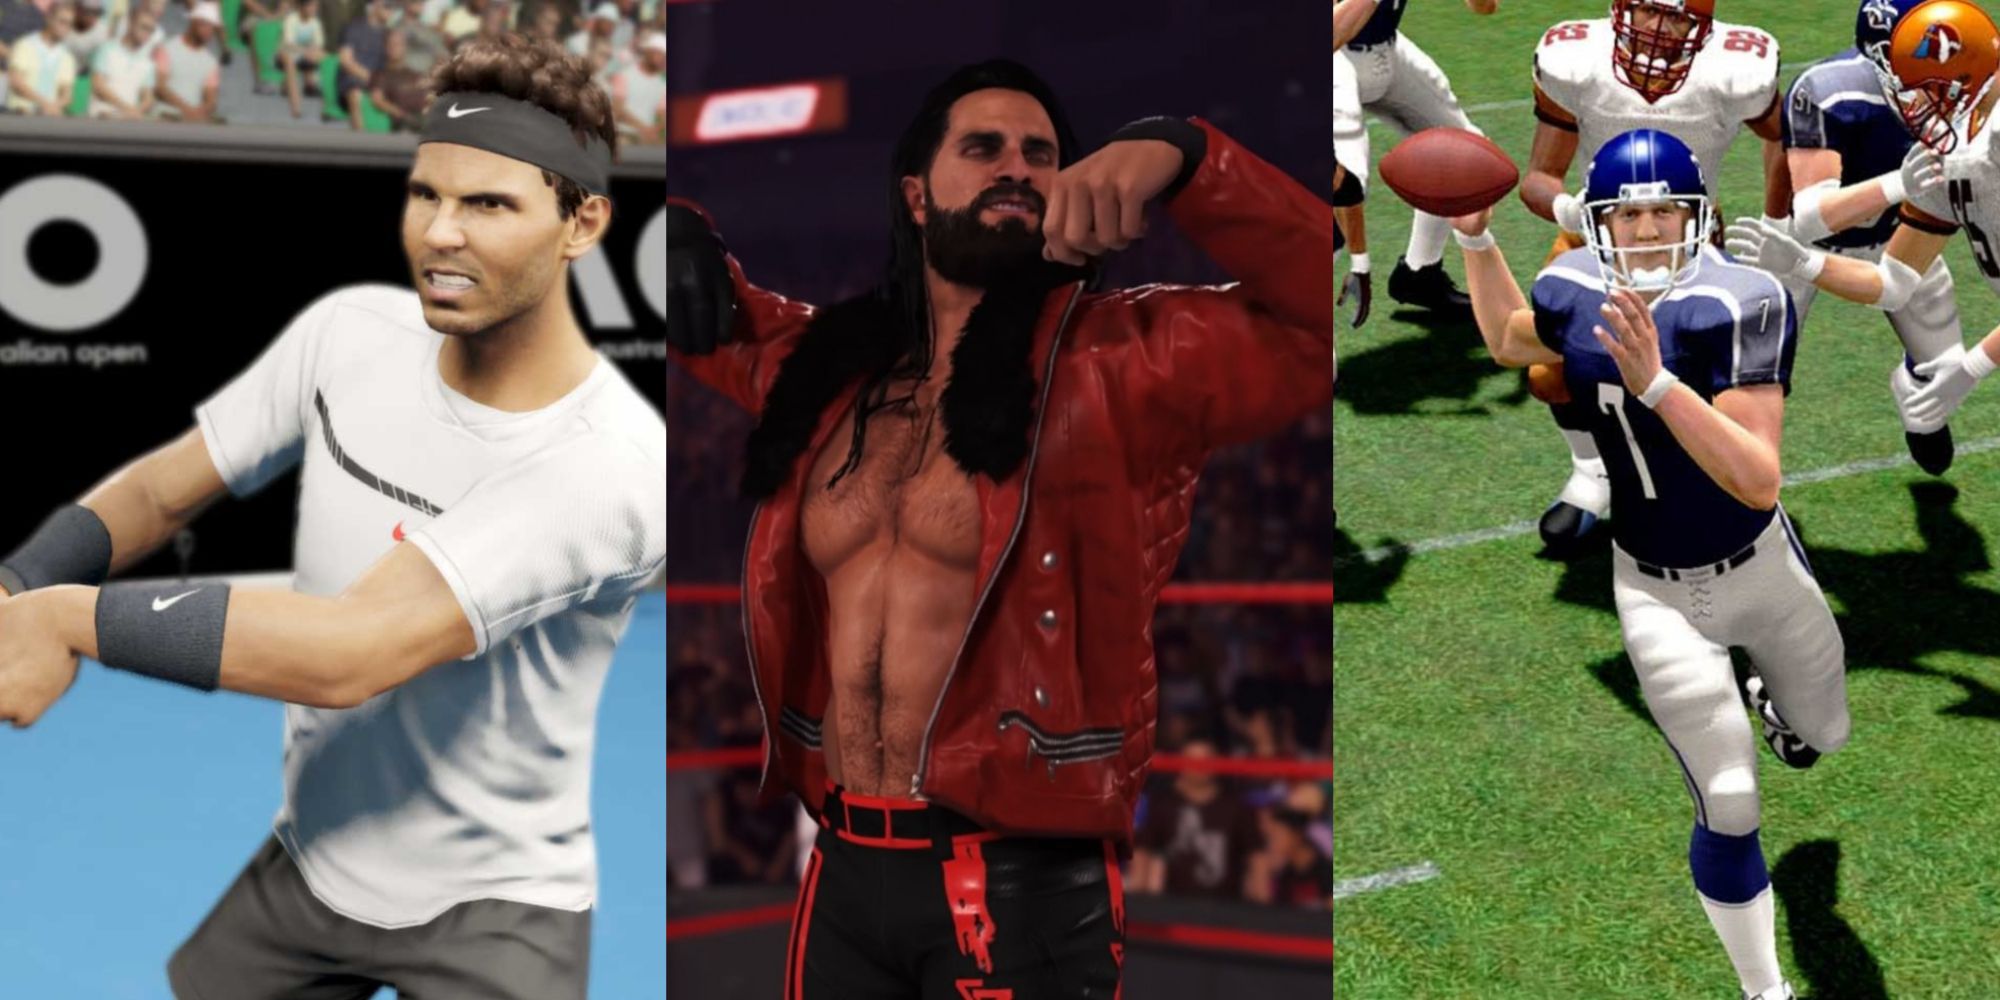 The 10 Best 2K Sports Games (That Aren't NBA 2K), According To